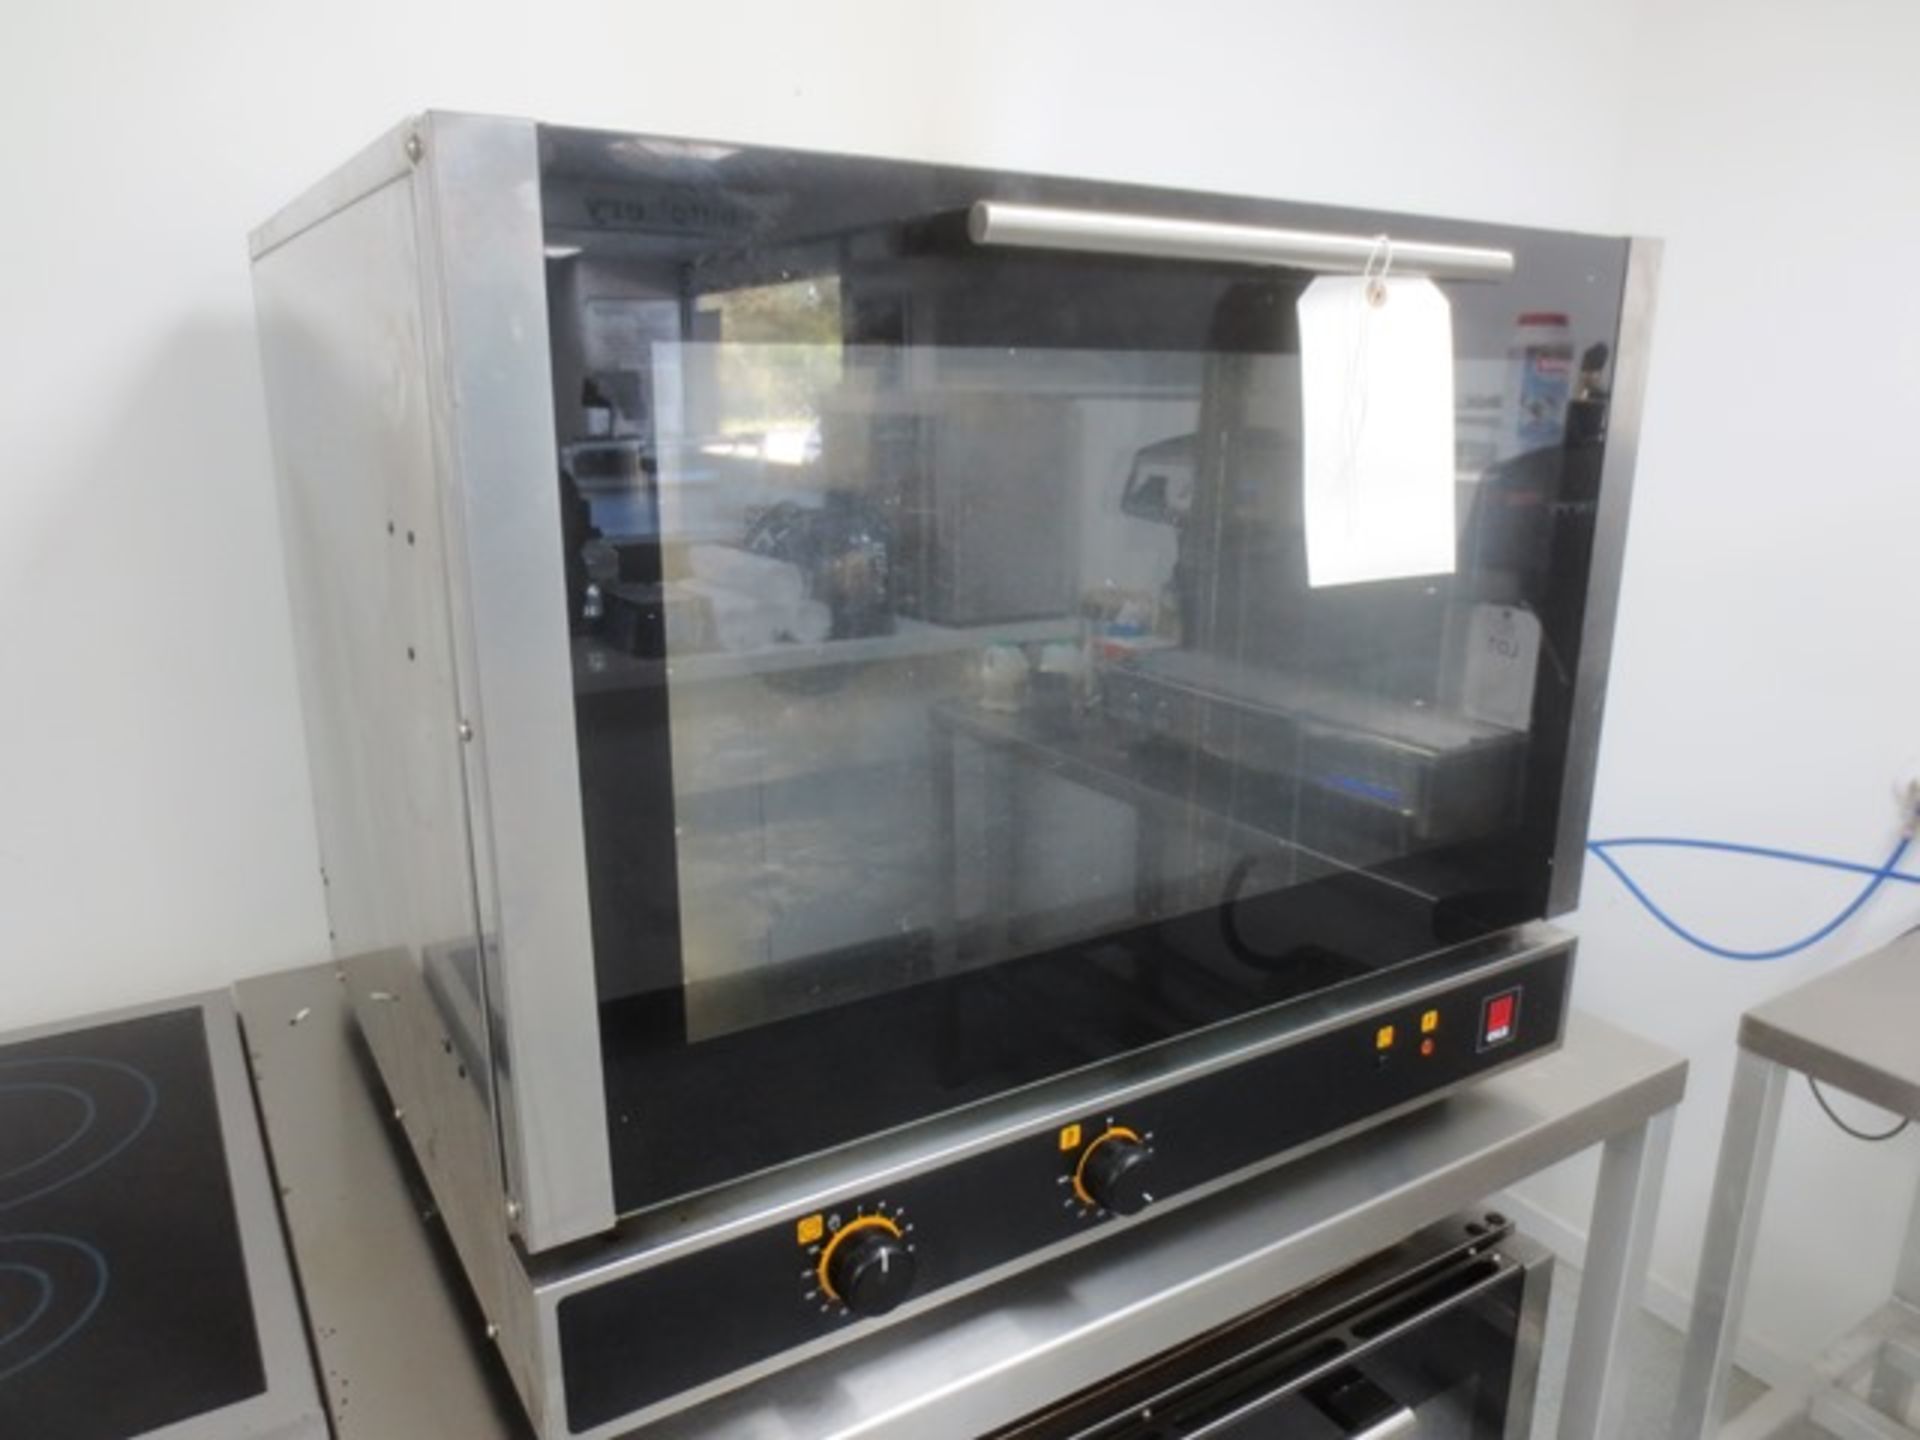 Eka stainless steel, glass fronted commercial oven, 3 phase, model EK F464 P/0/00592, serial no: